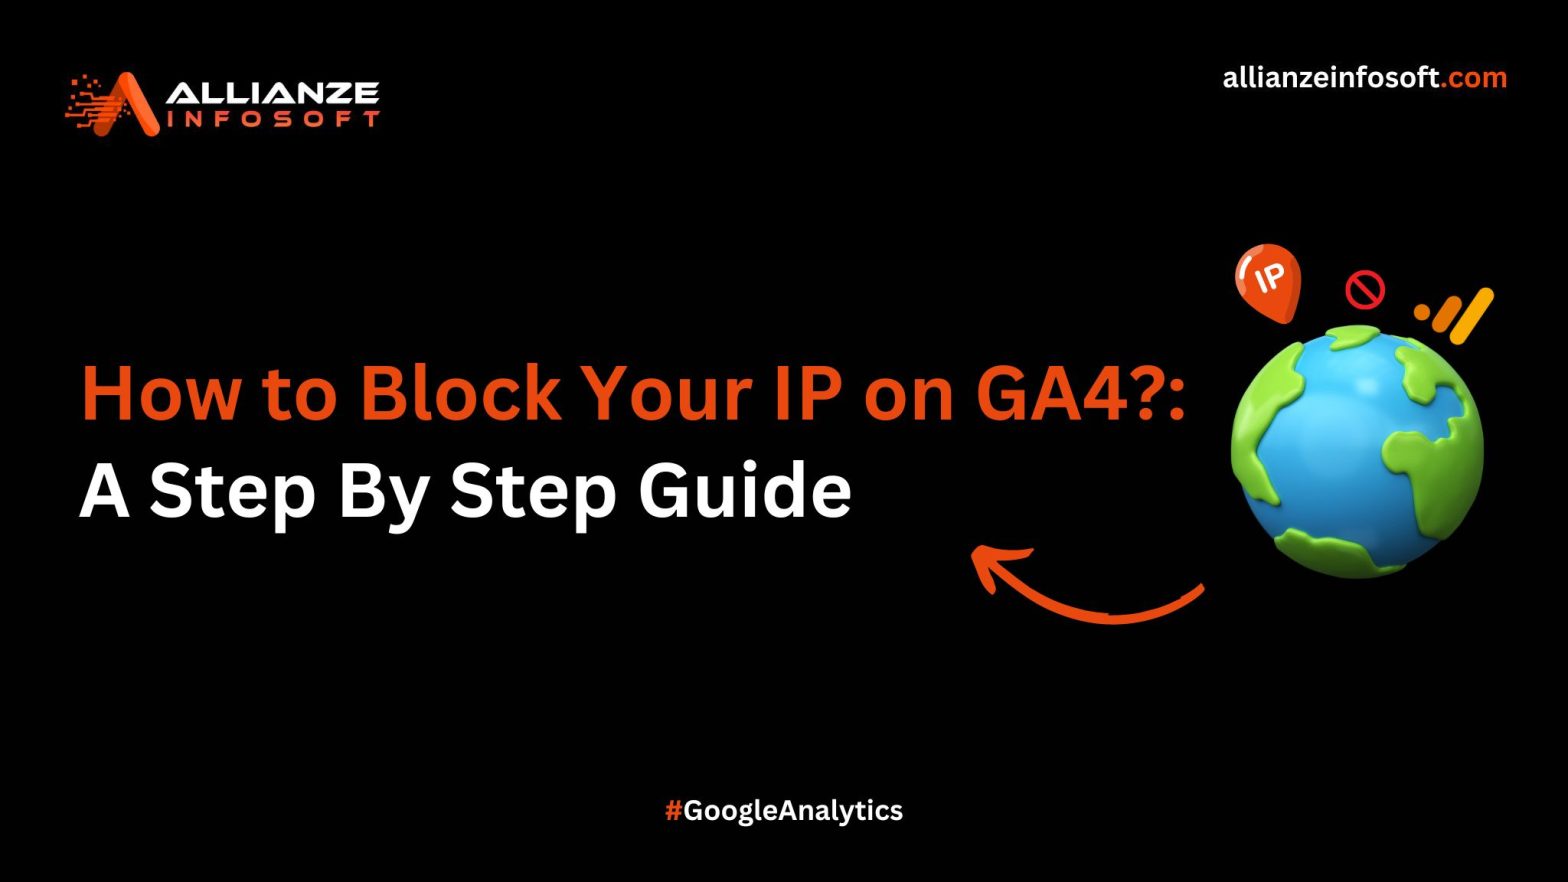 GA4 IP Blocking Guide: Exclude Your IP for Accurate Analytics - Allianze Infosoft